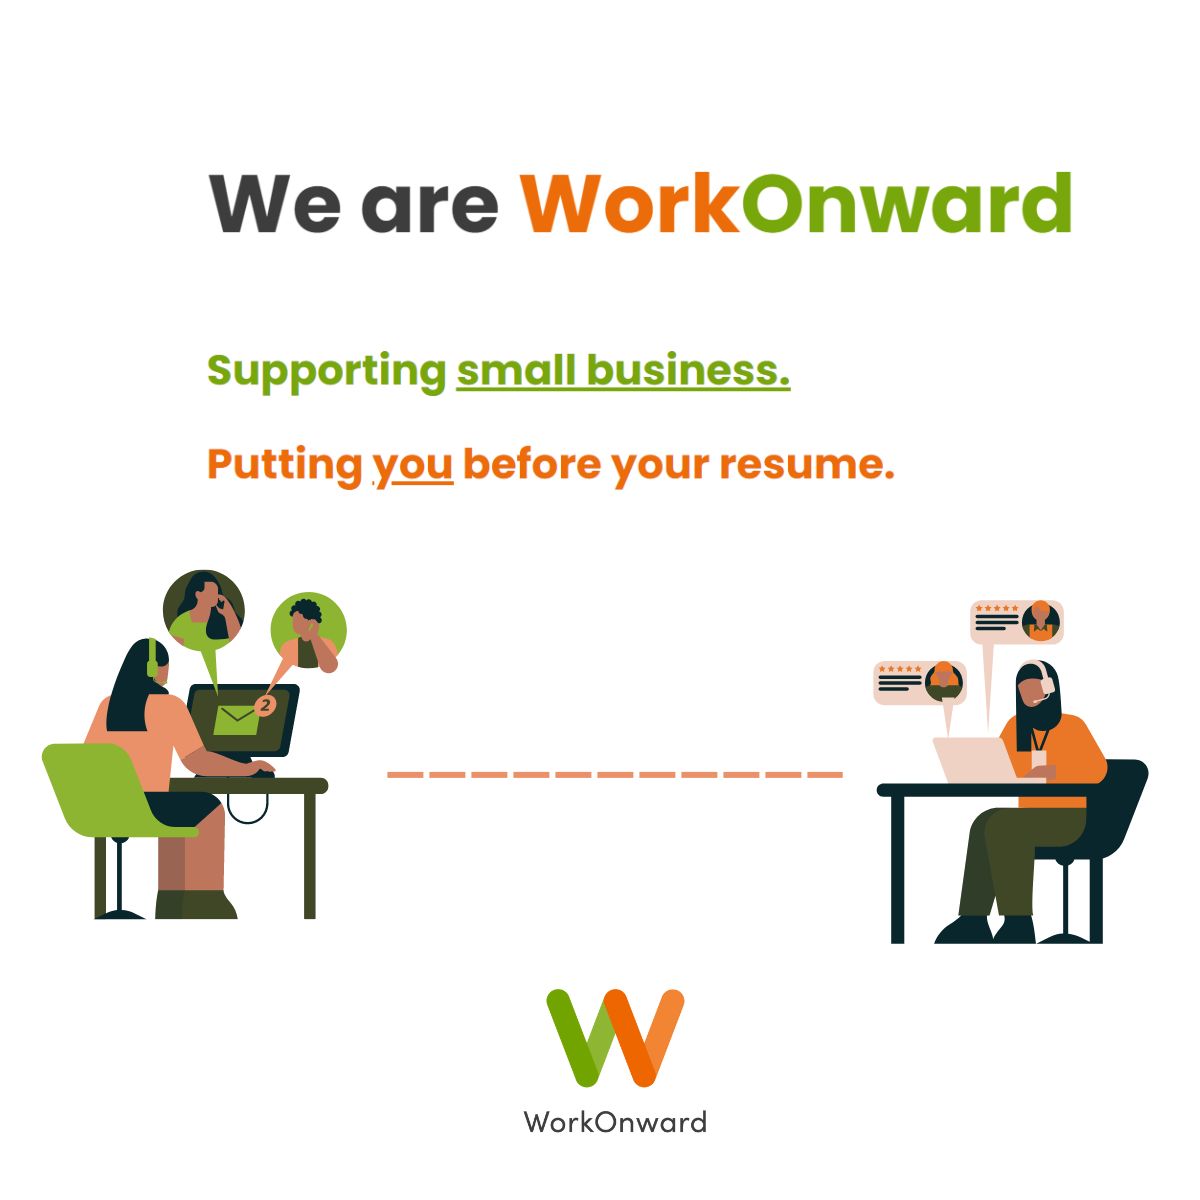 Visit WOW workonward.com 

#job #jobs #hr #resume #hiring #remotejobs #work #jobseekers #businessowners #ceo #recruiters #hr #jobsearch #supportsmallbusinesses #lookingforjobs #startups #startup #hybrid #WorkFromHome #local #localjobs #career #careeradvice #vcs #vc #NYC